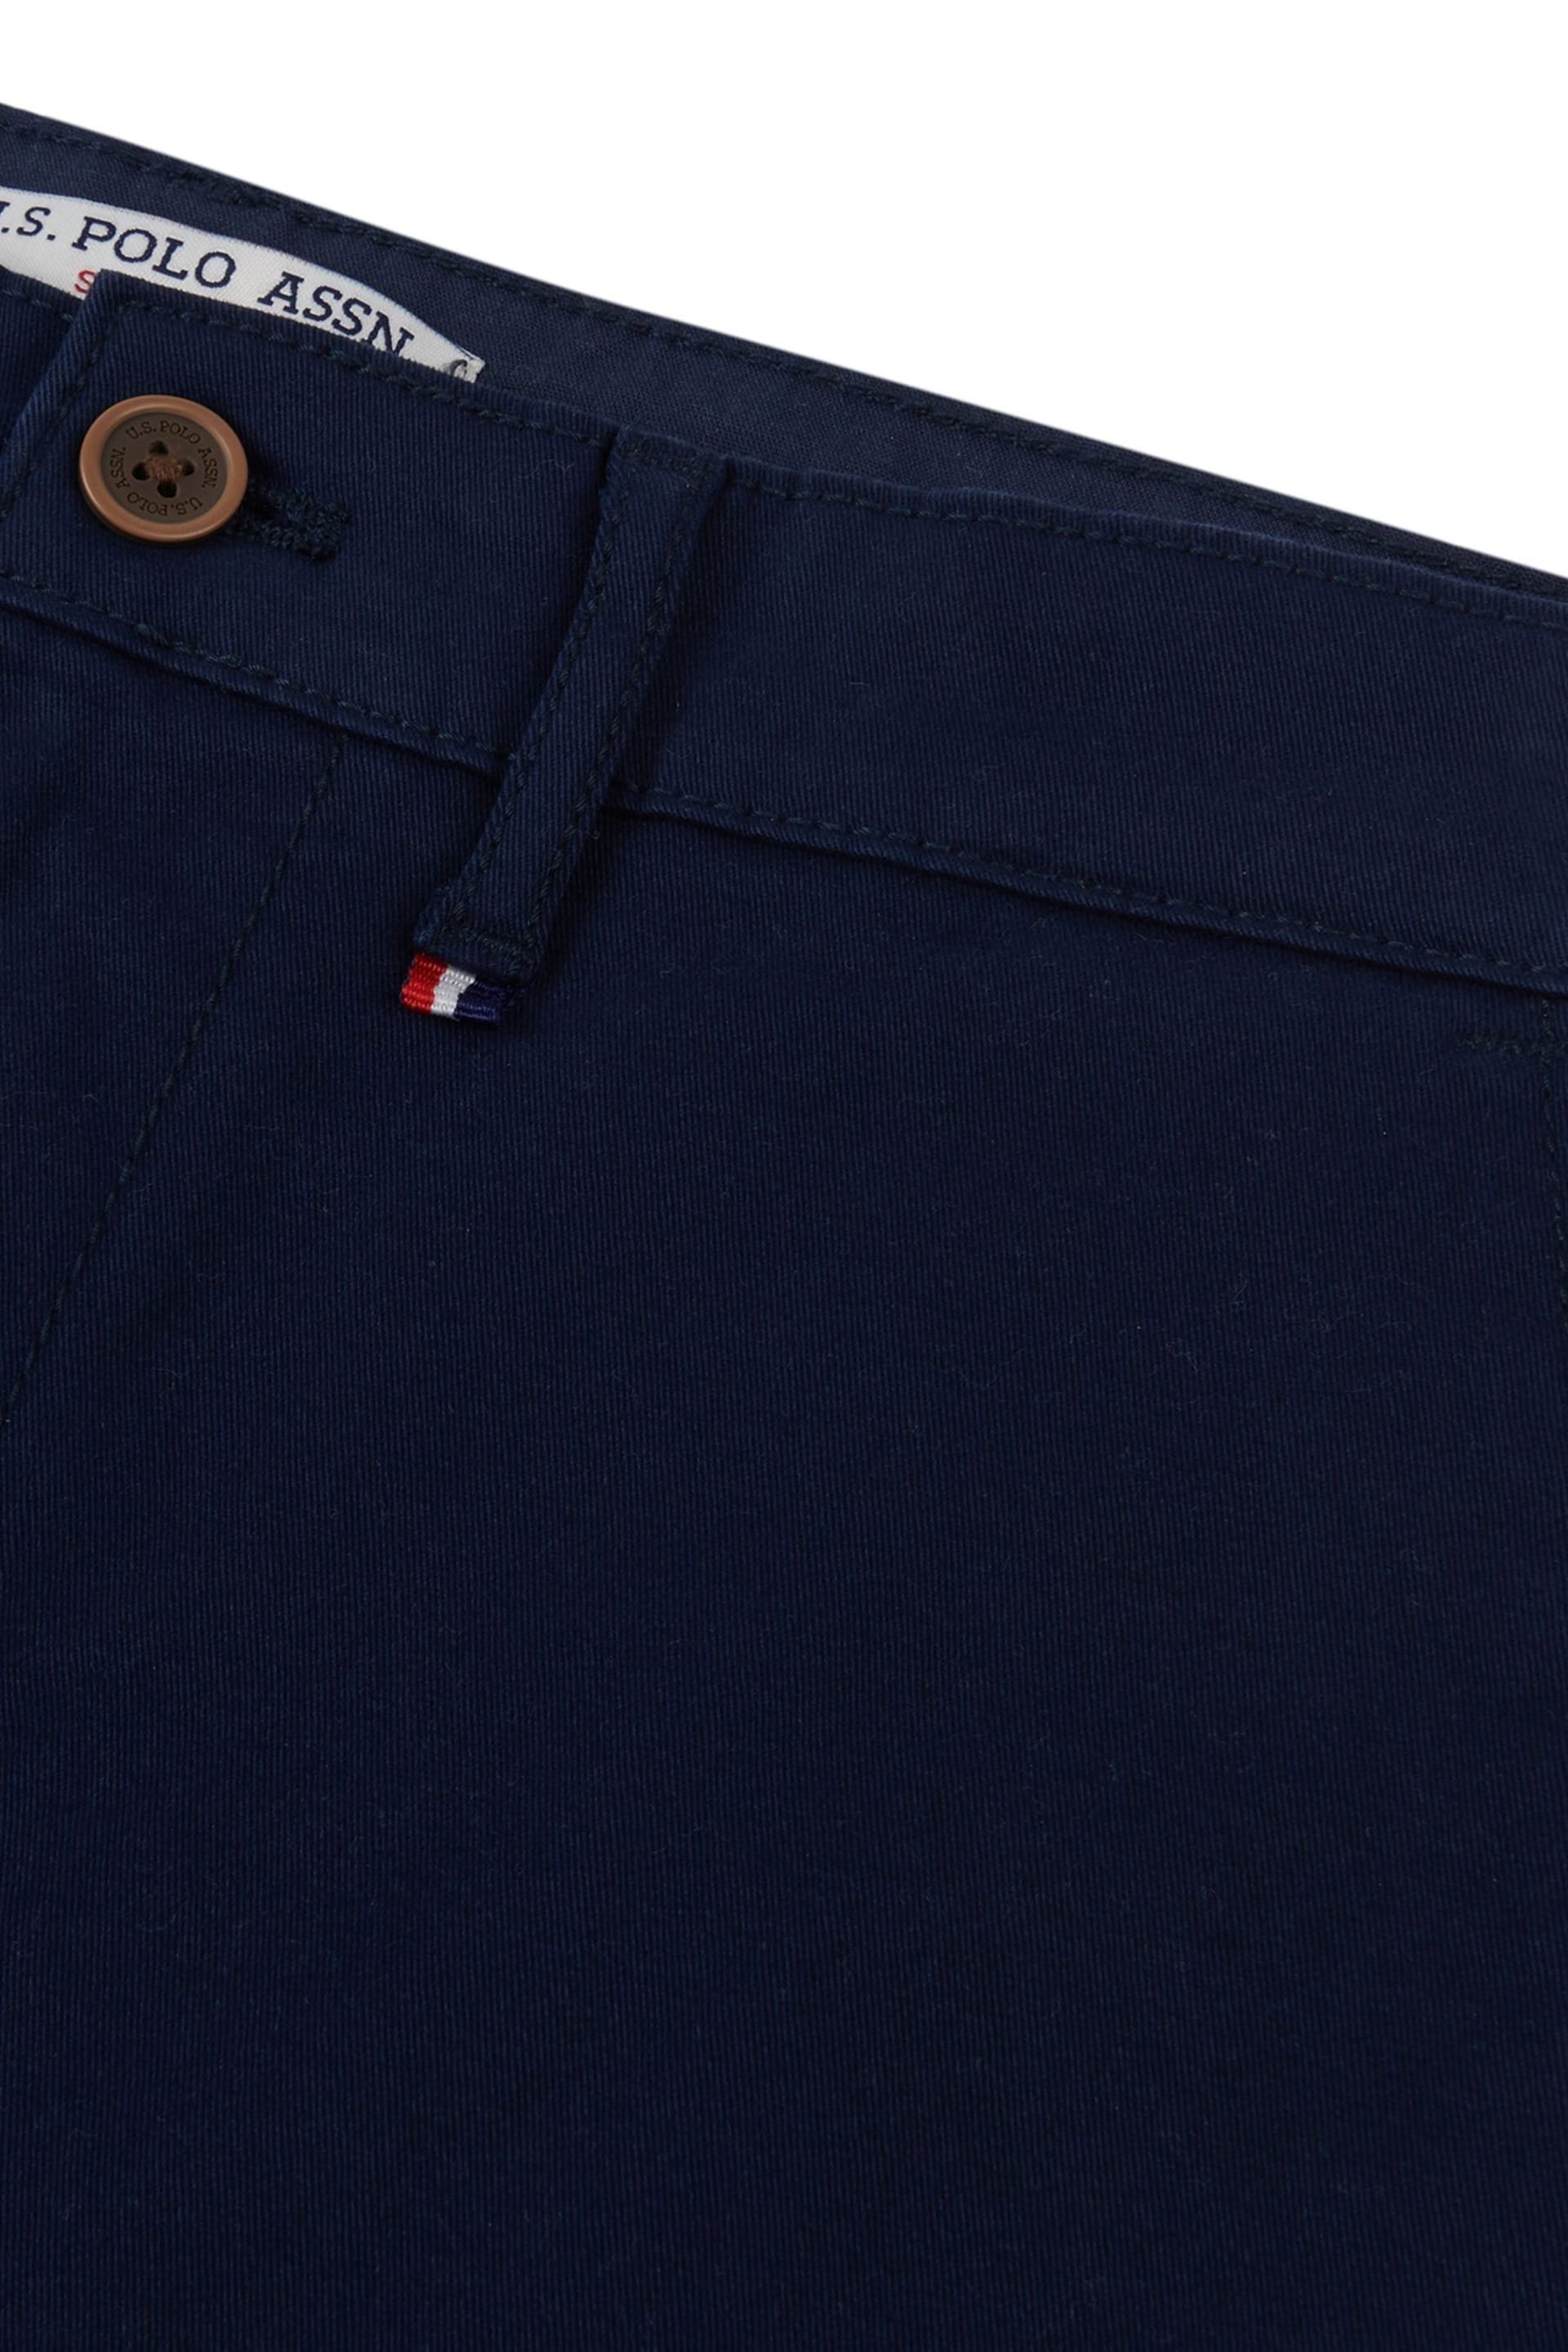 U.S. Polo Assn. Heritage Chinos - Image 5 of 5